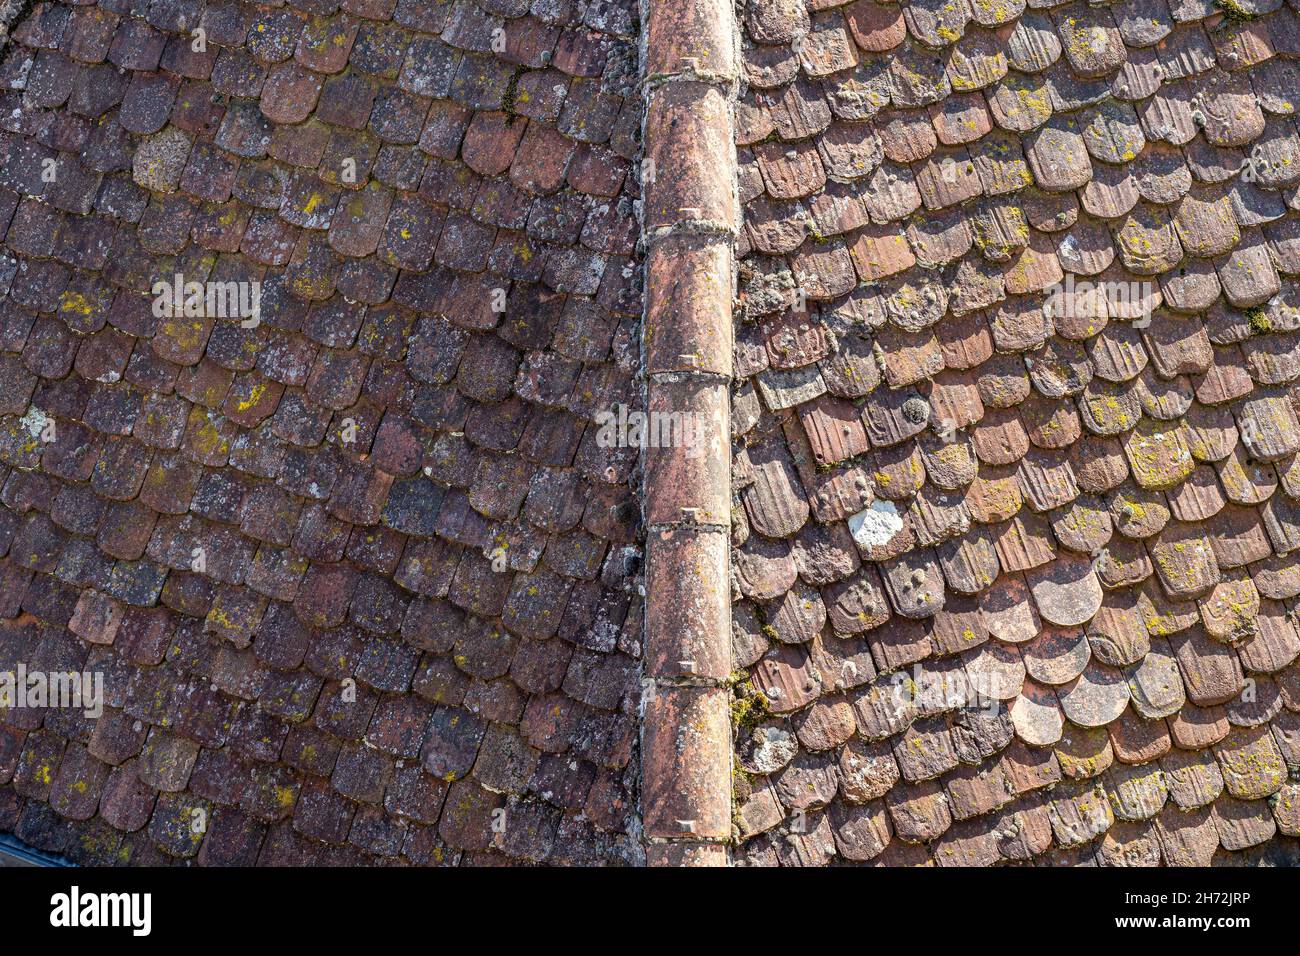 Roof of one of the towers of the castle Stock Photo